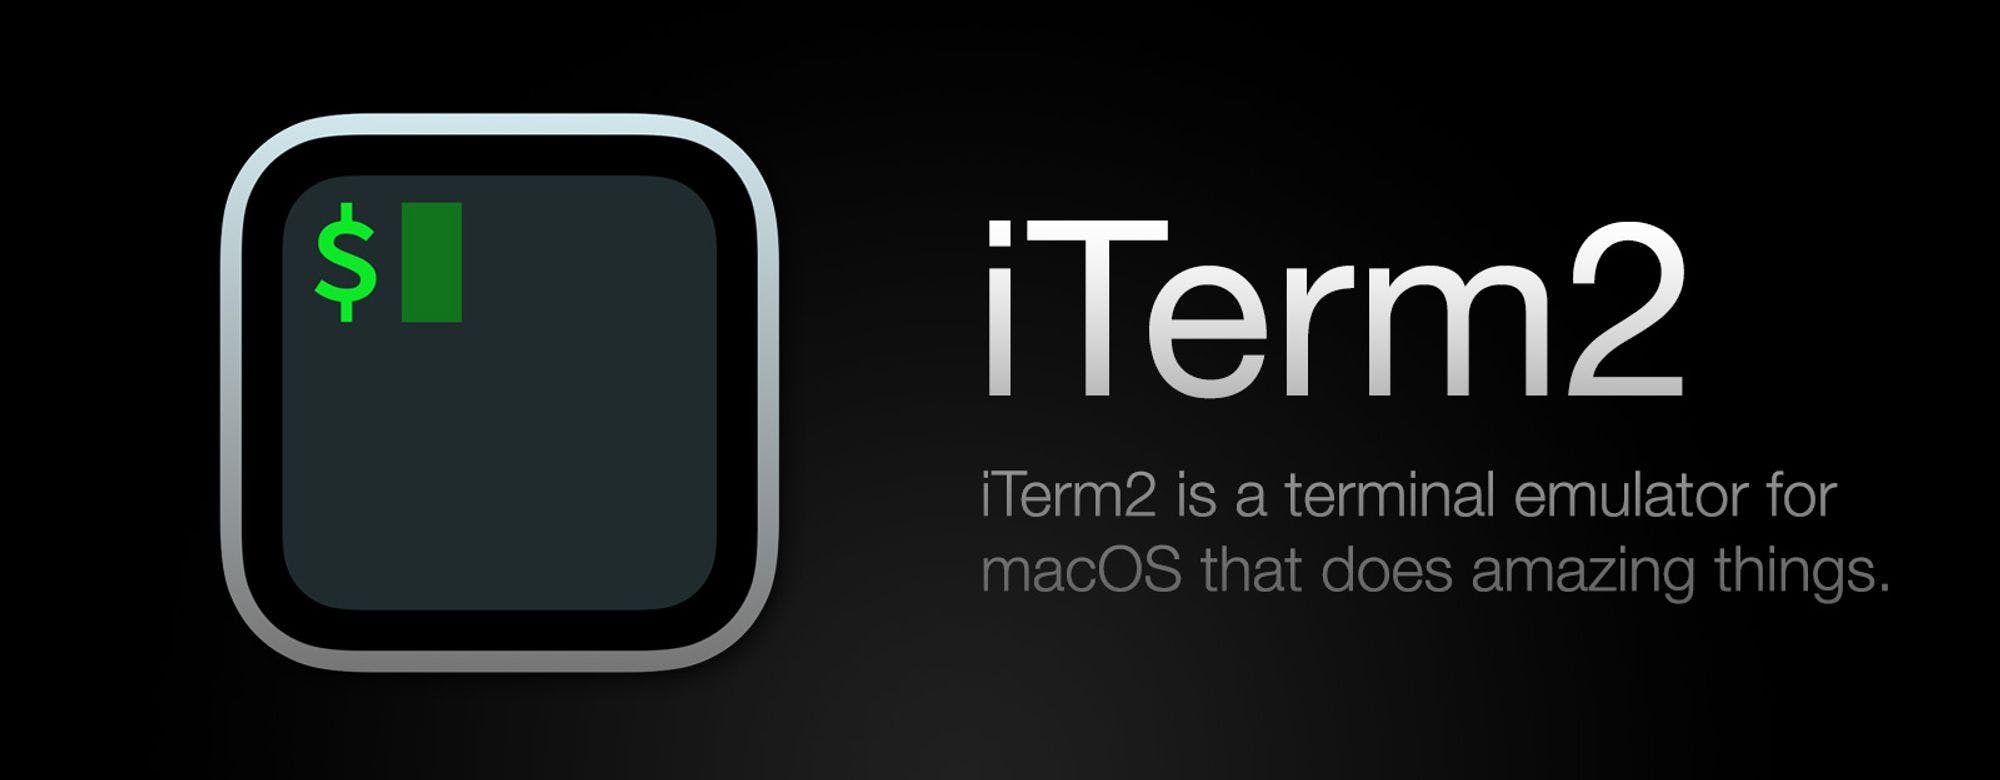 Downloads - iTerm2 - macOS Terminal Replacement